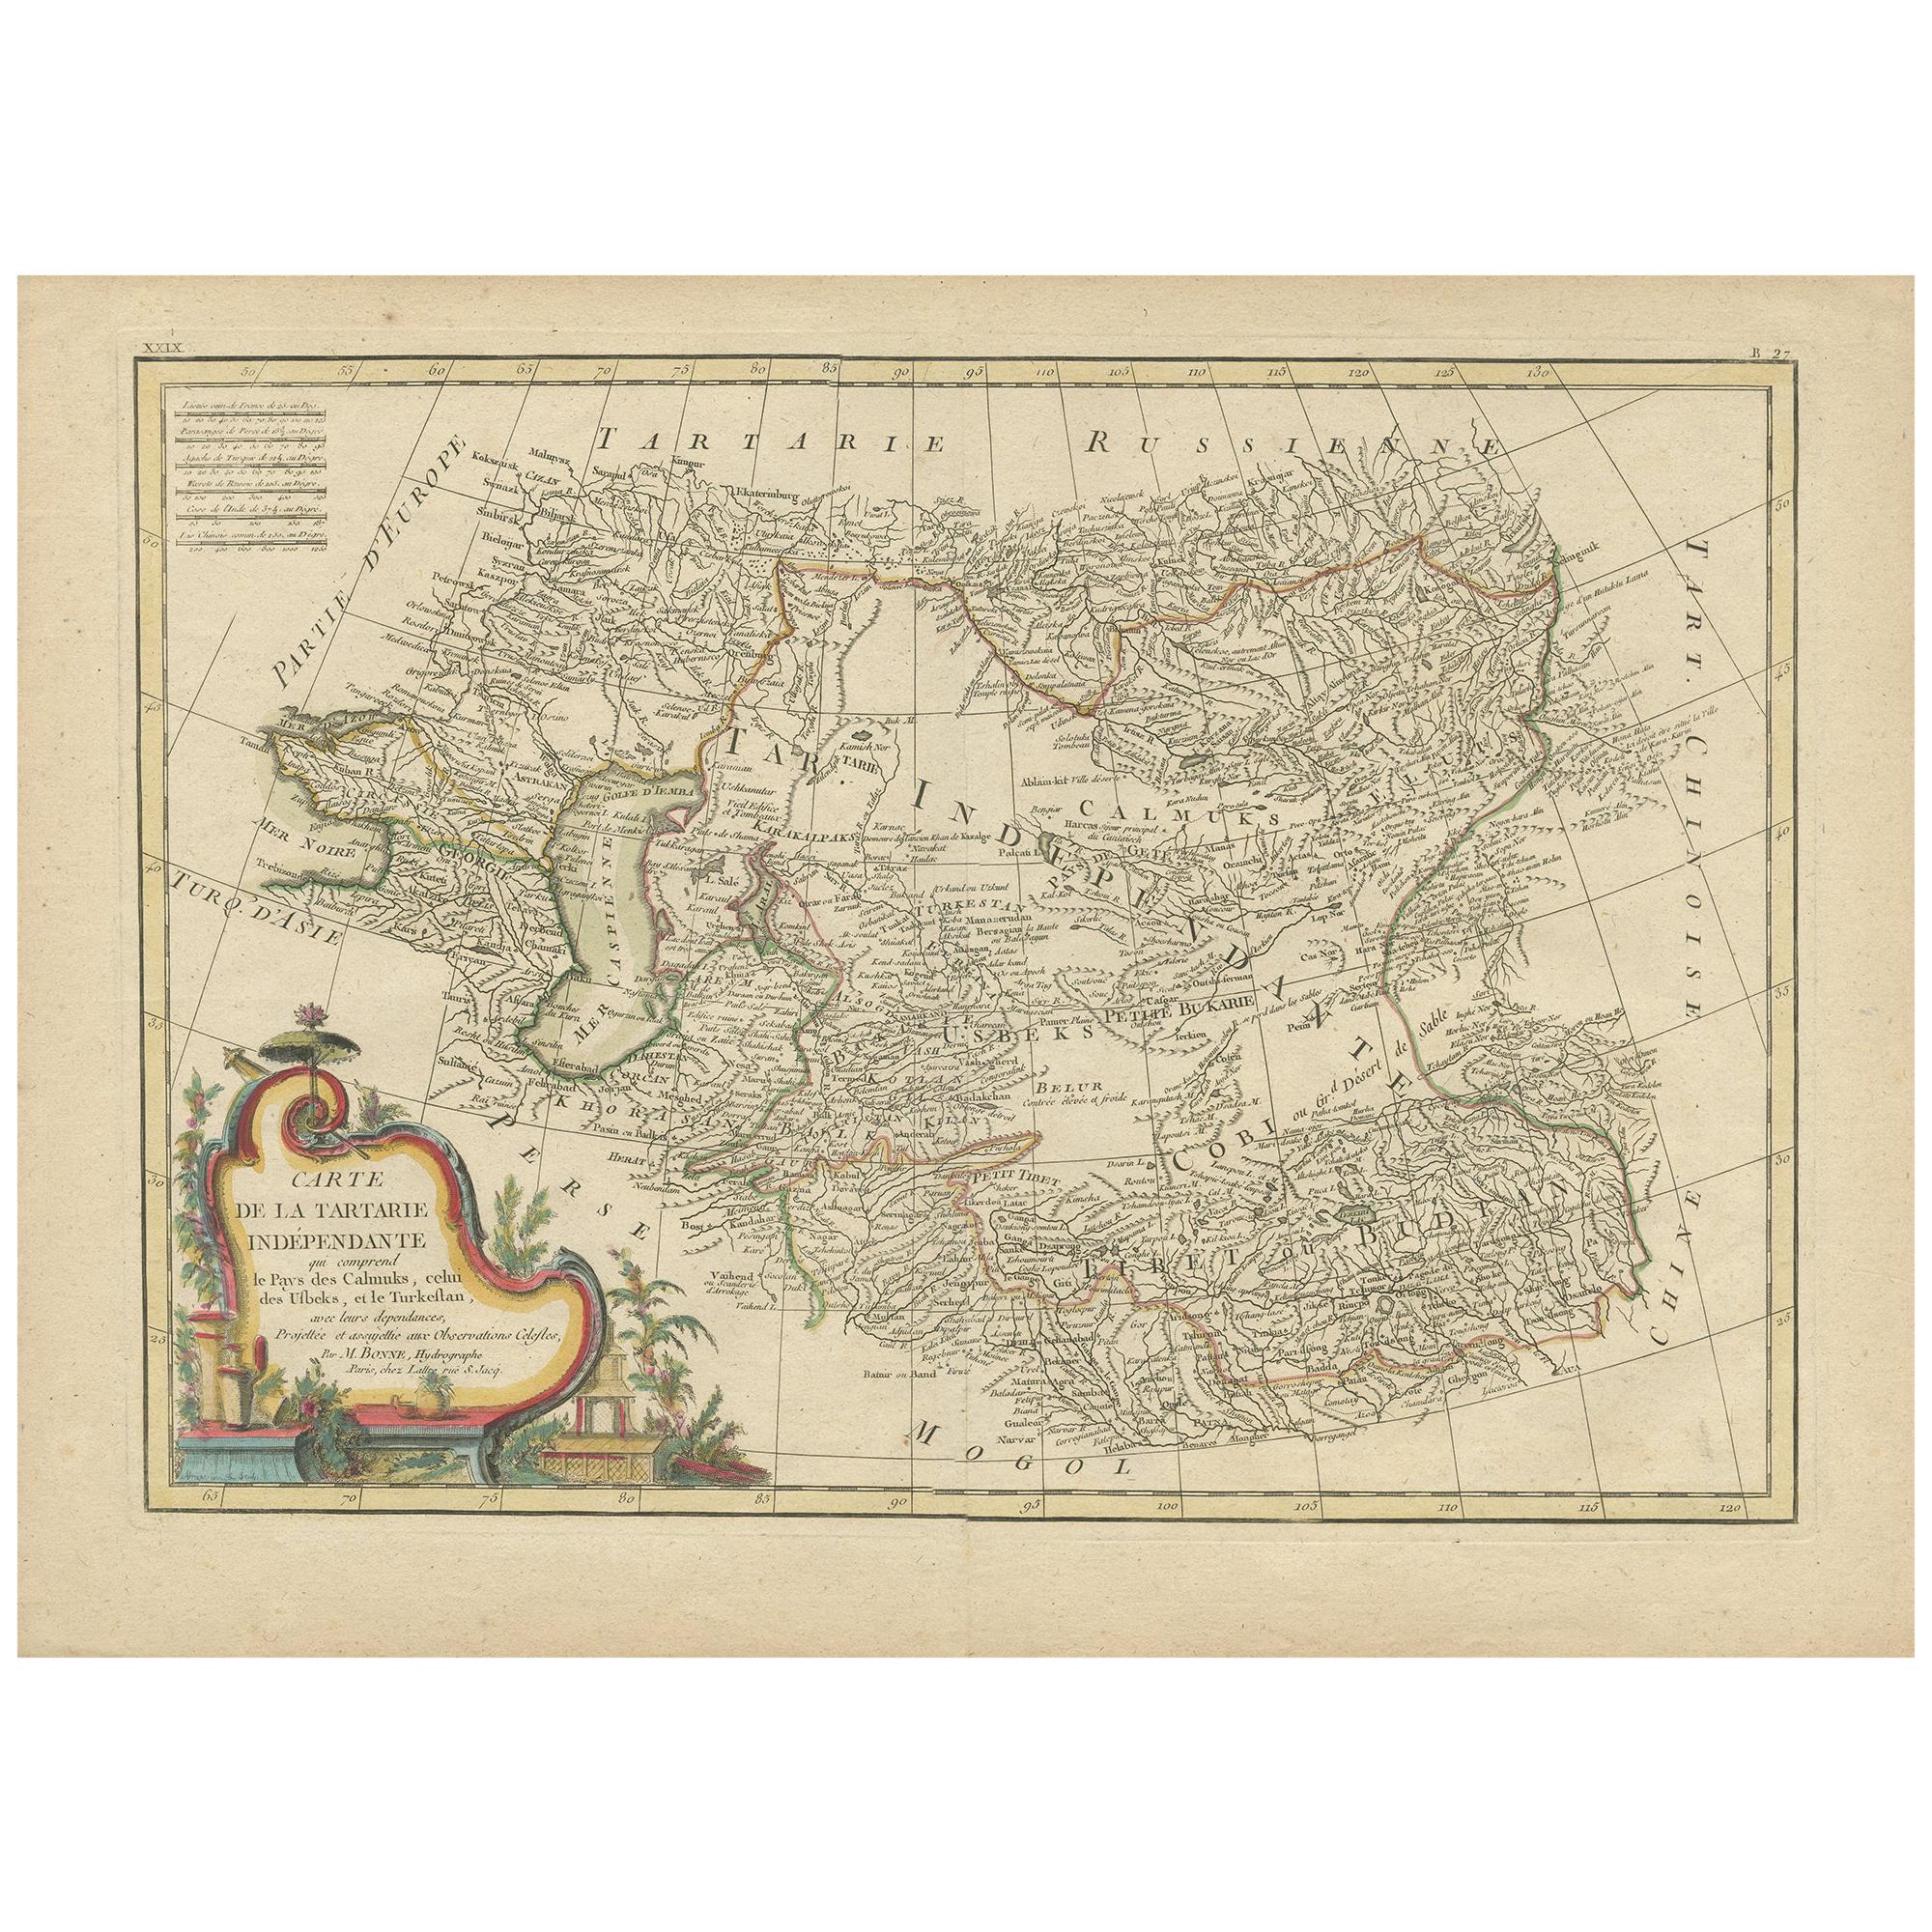 Antique Map of Central Asia by Bonne, 1778